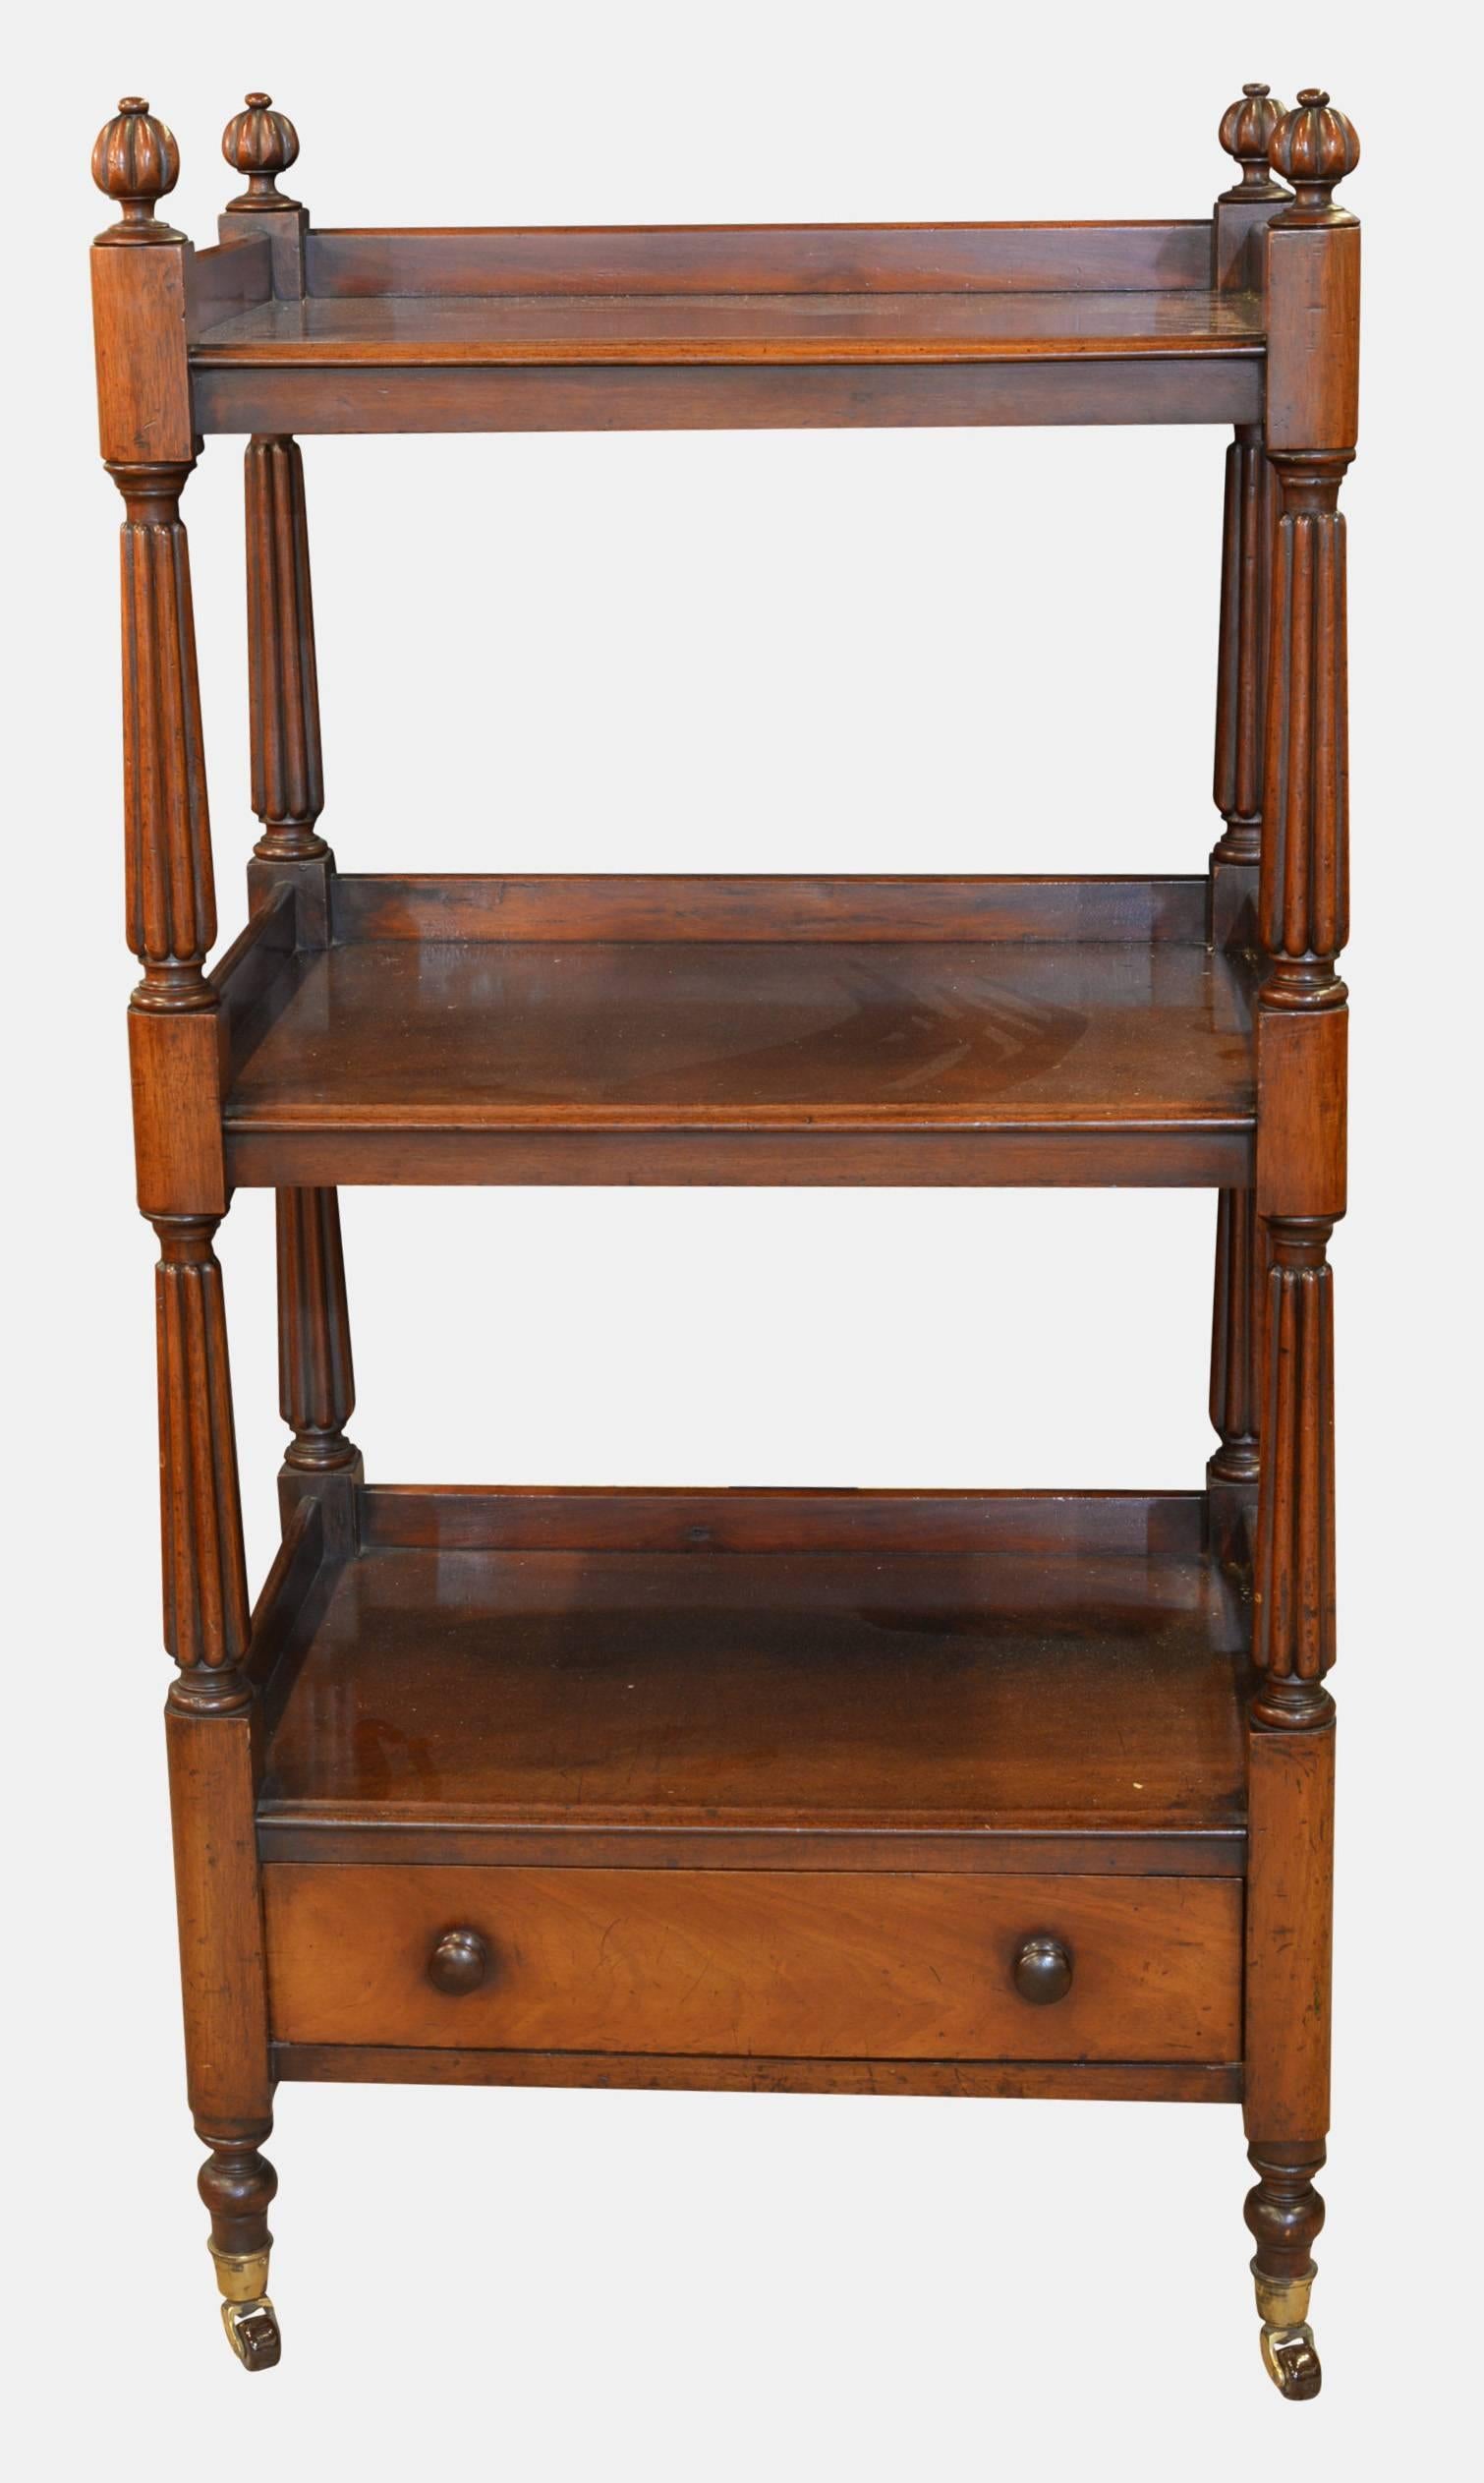 19th century mahogany buffet with reeded columns and drawer,
circa 1850.
  